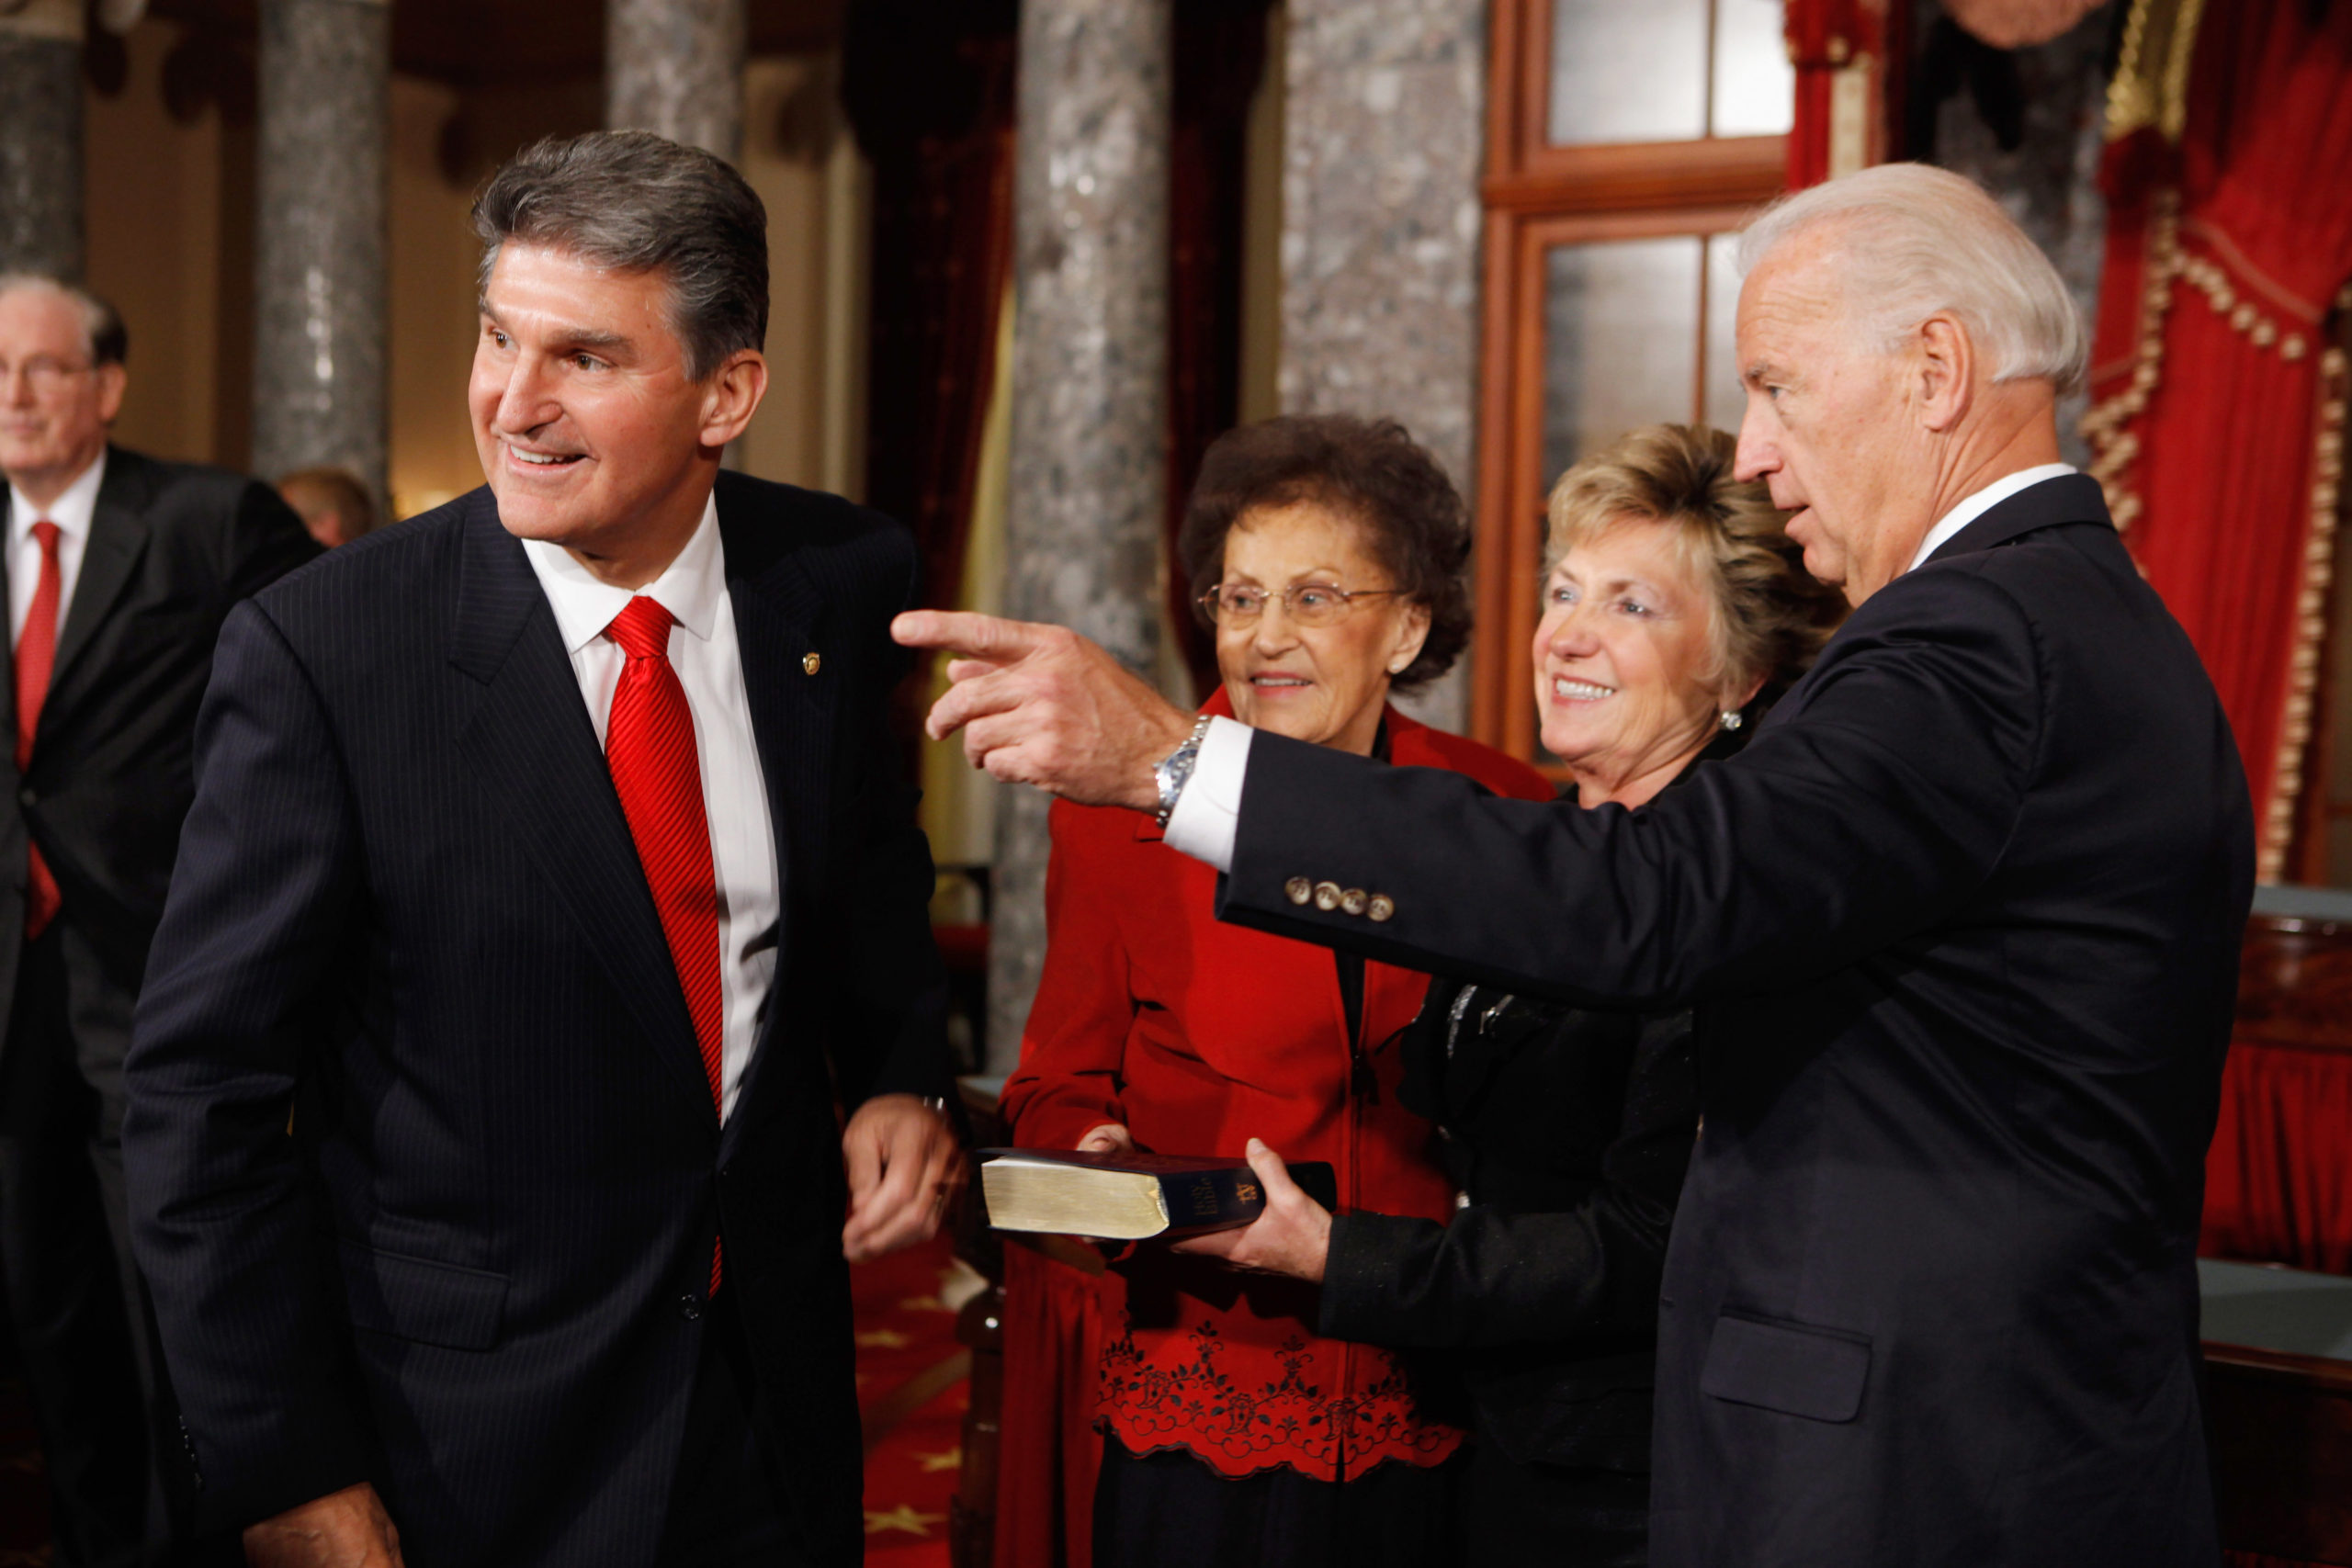 Biden Holds Ceremonial Swearing In Of New Dem. Senators Coons And Manchin